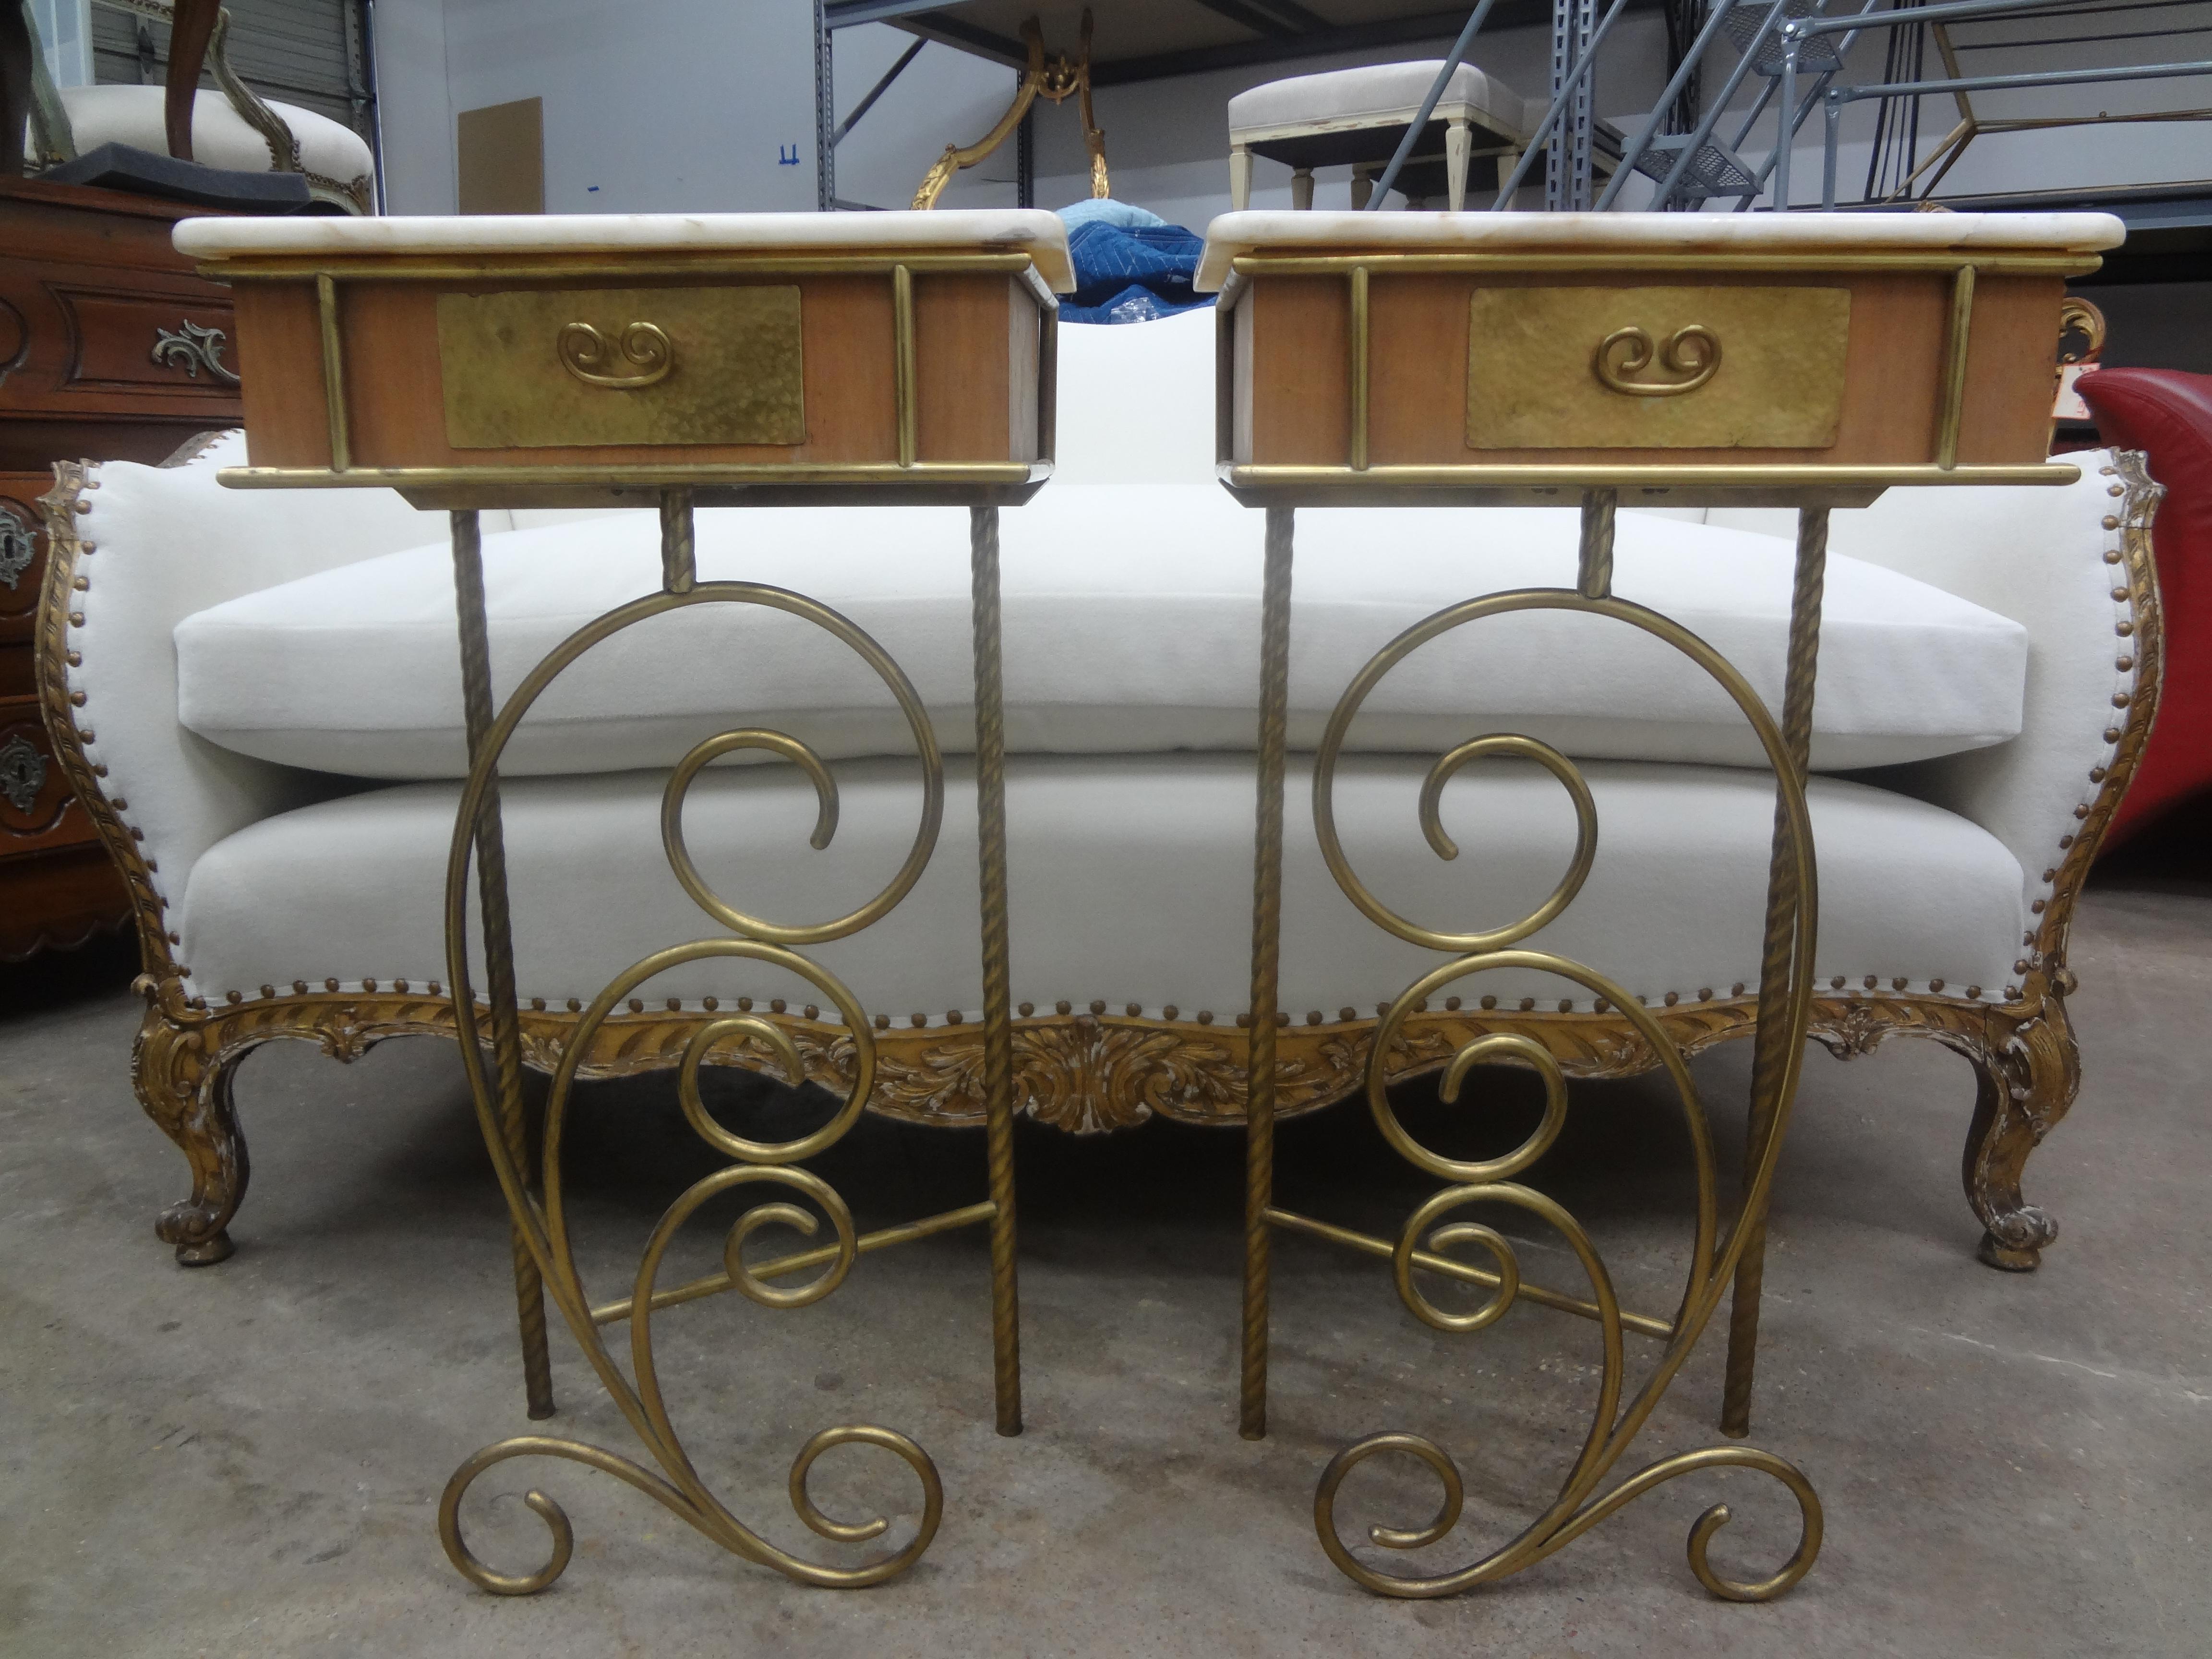 Pair of Italian Modern brass nightstands or tables.
This unusual pair of Italian Gio Ponti style Mid-Century Modern brass night stands, bedside tables or side tables have an interesting design with a single drawer and marble tops.
Great Italian